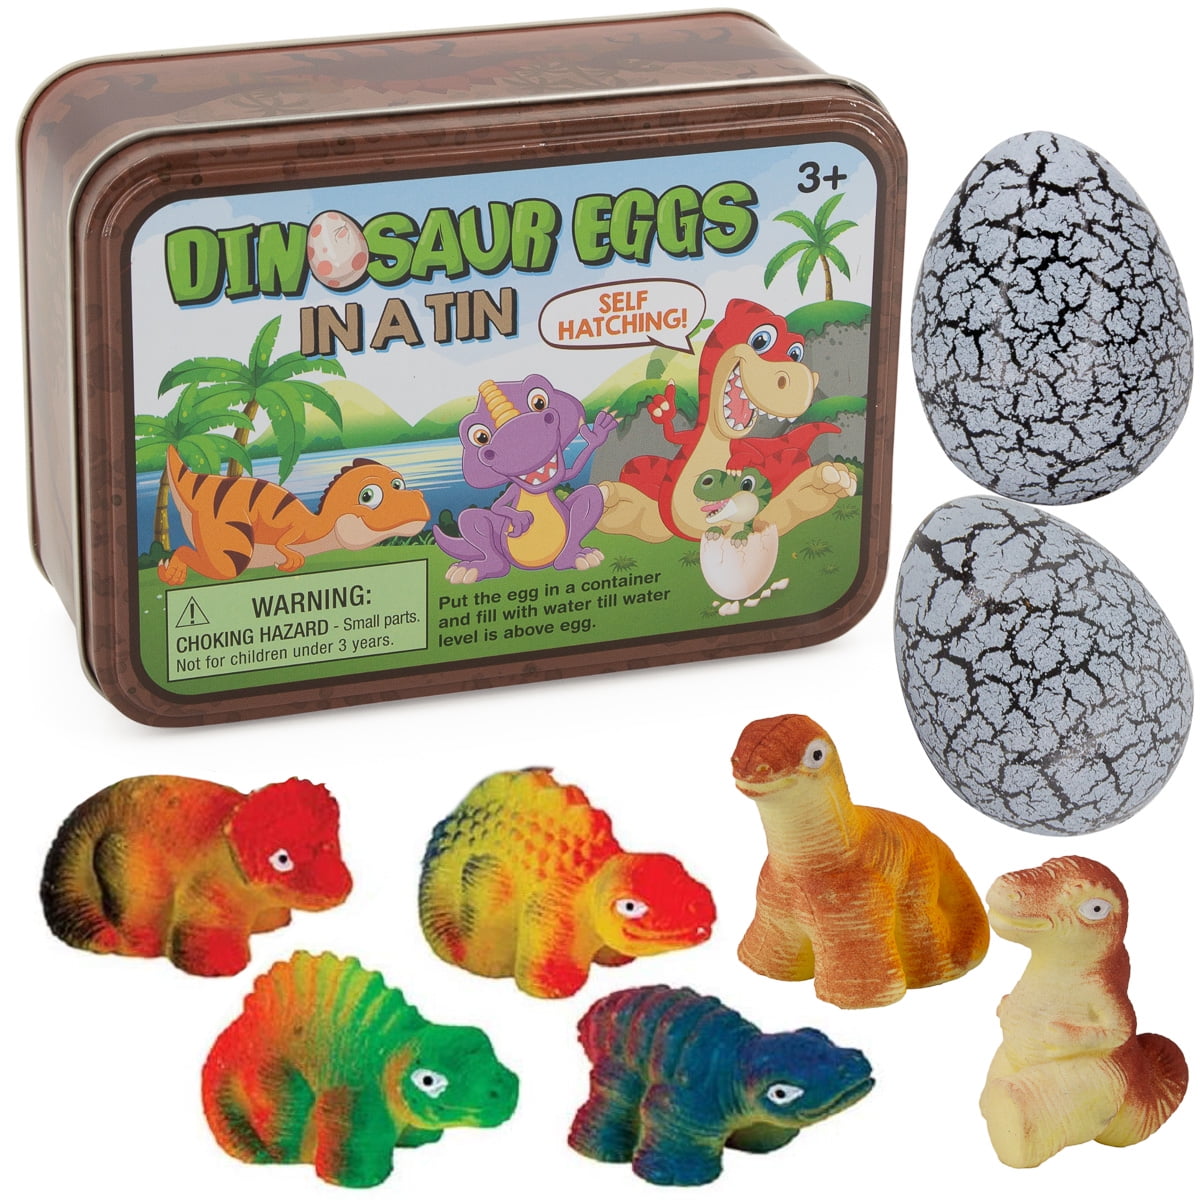 Totally Cool Toys Glow In The Dark Dinosaur Fossil Egg Series 